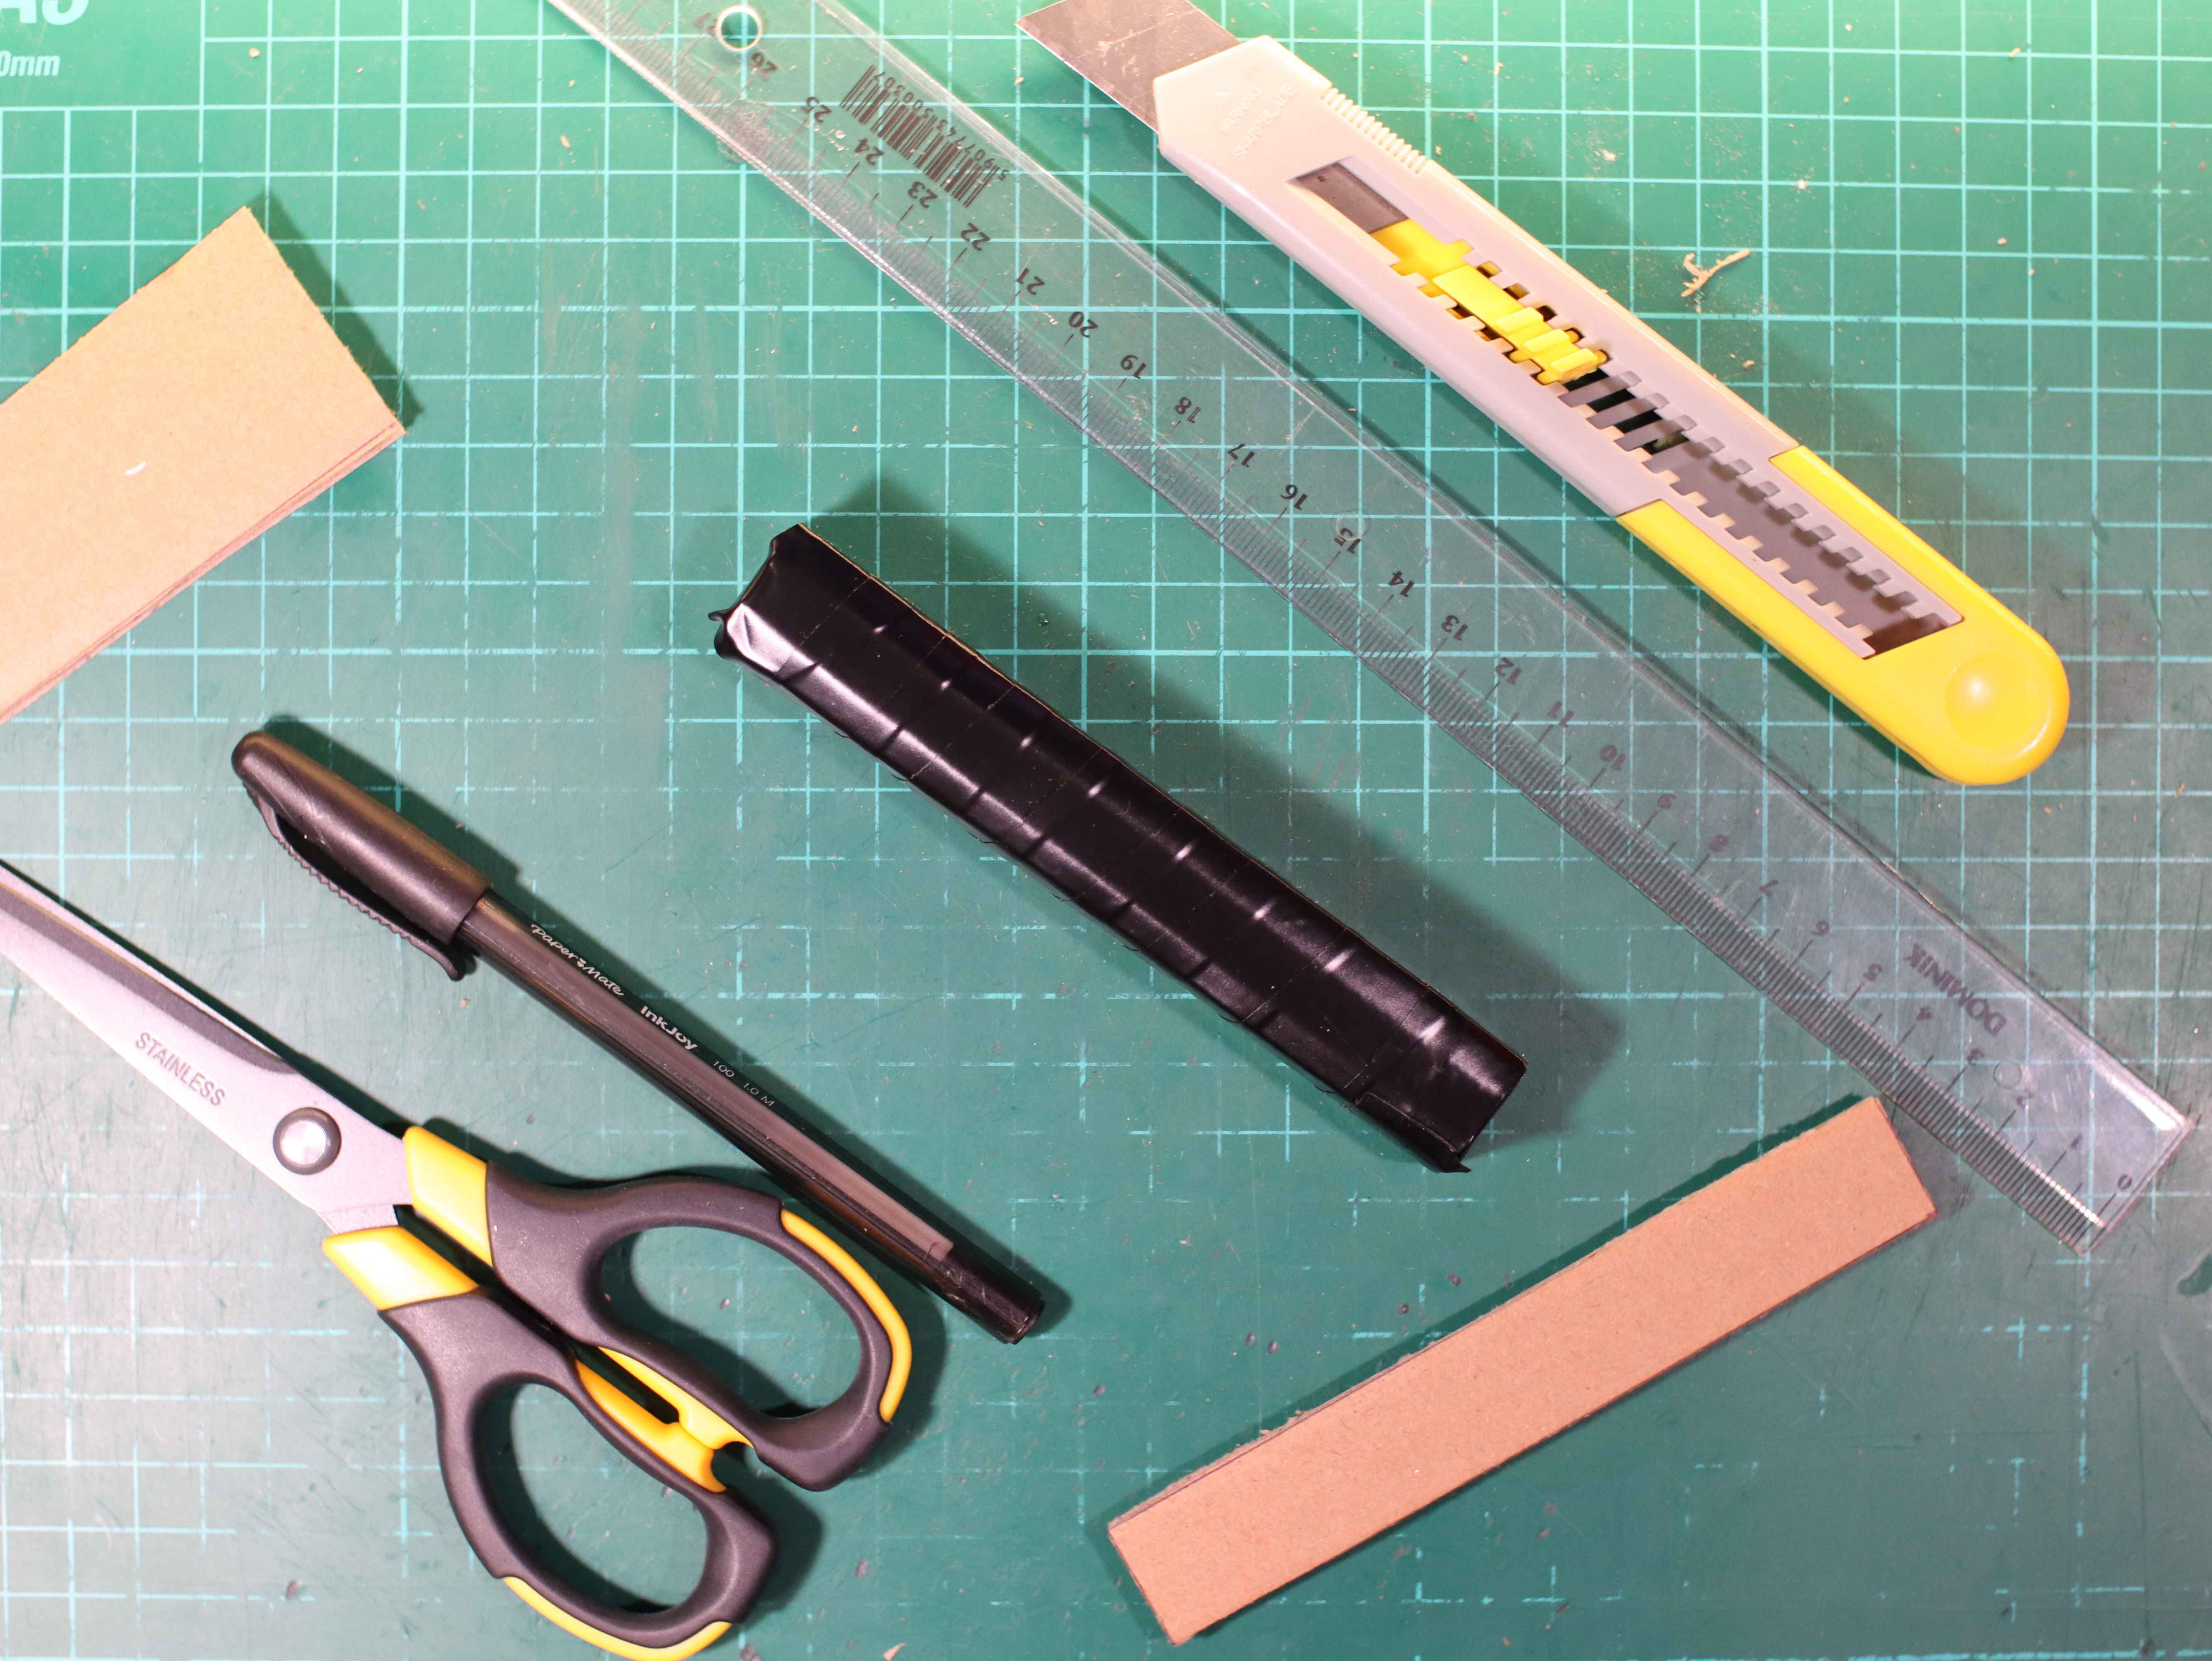 Cardboard battery covered with black insulating tape. Scissors, a knife, a pen, a ruler are on the green service mat.